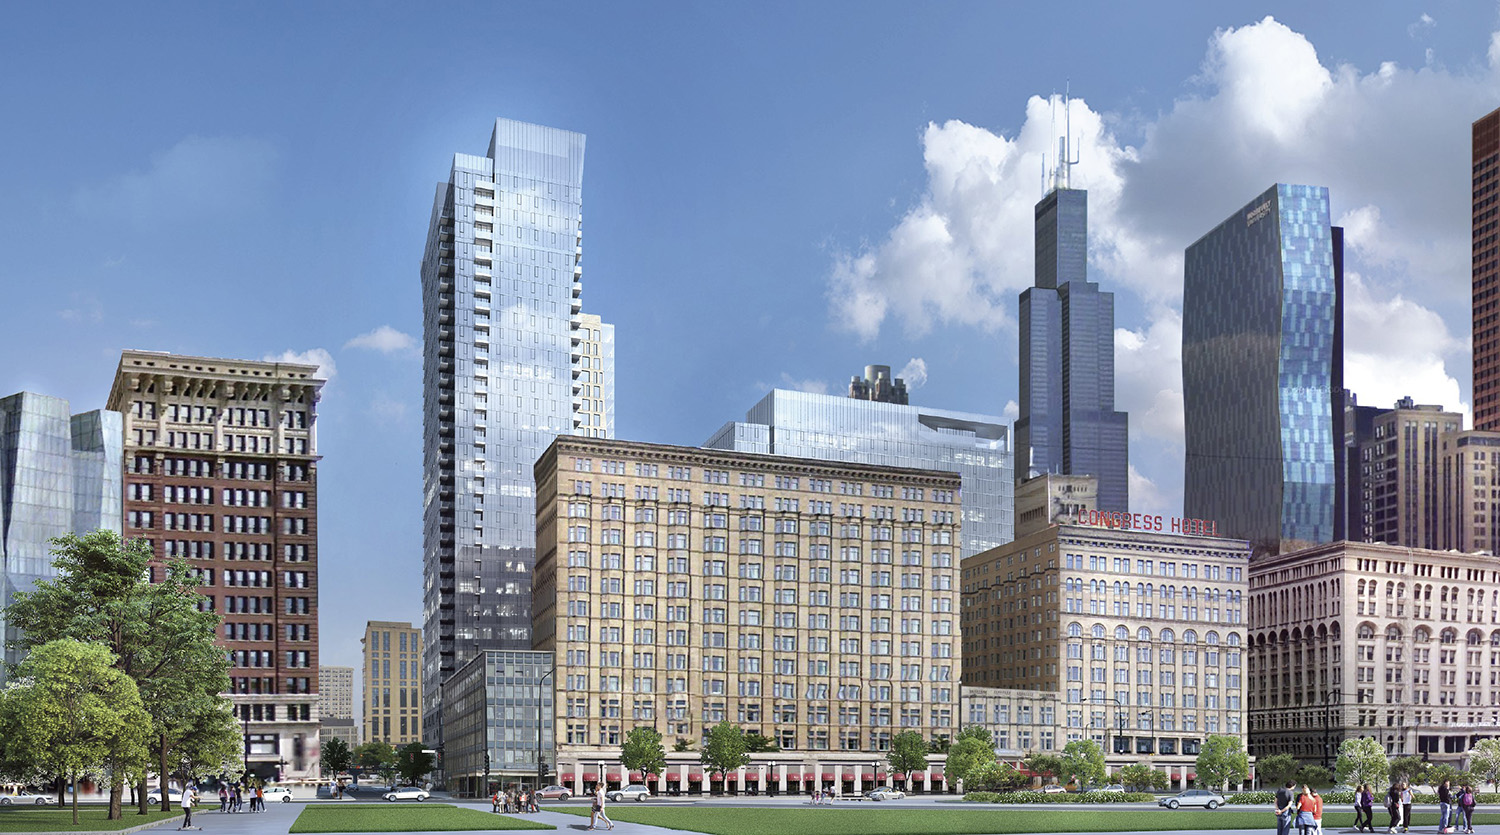 View of 525 S Wabash Avenue. Rendering by BKV Group